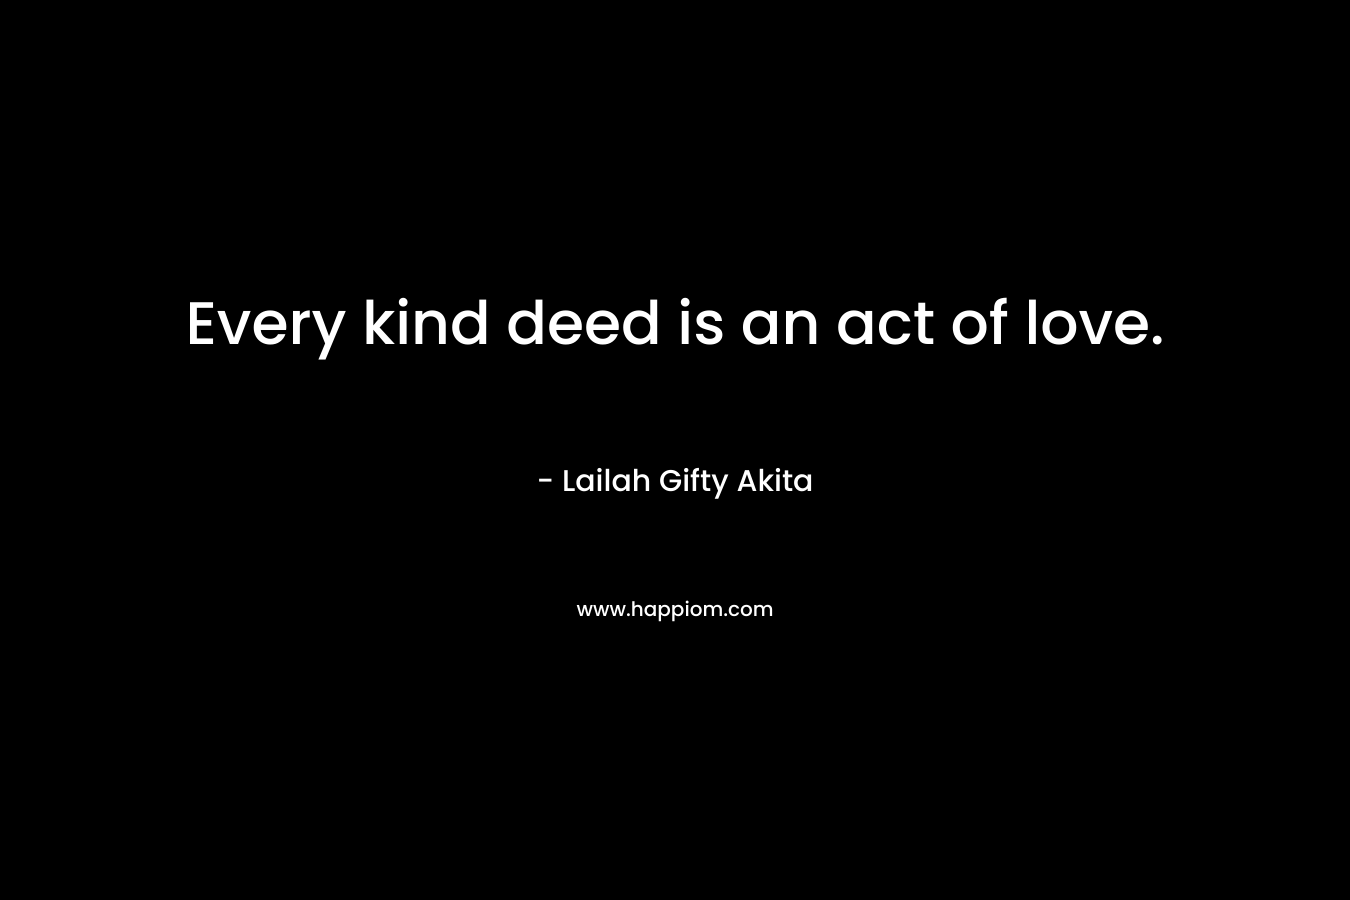 Every kind deed is an act of love.